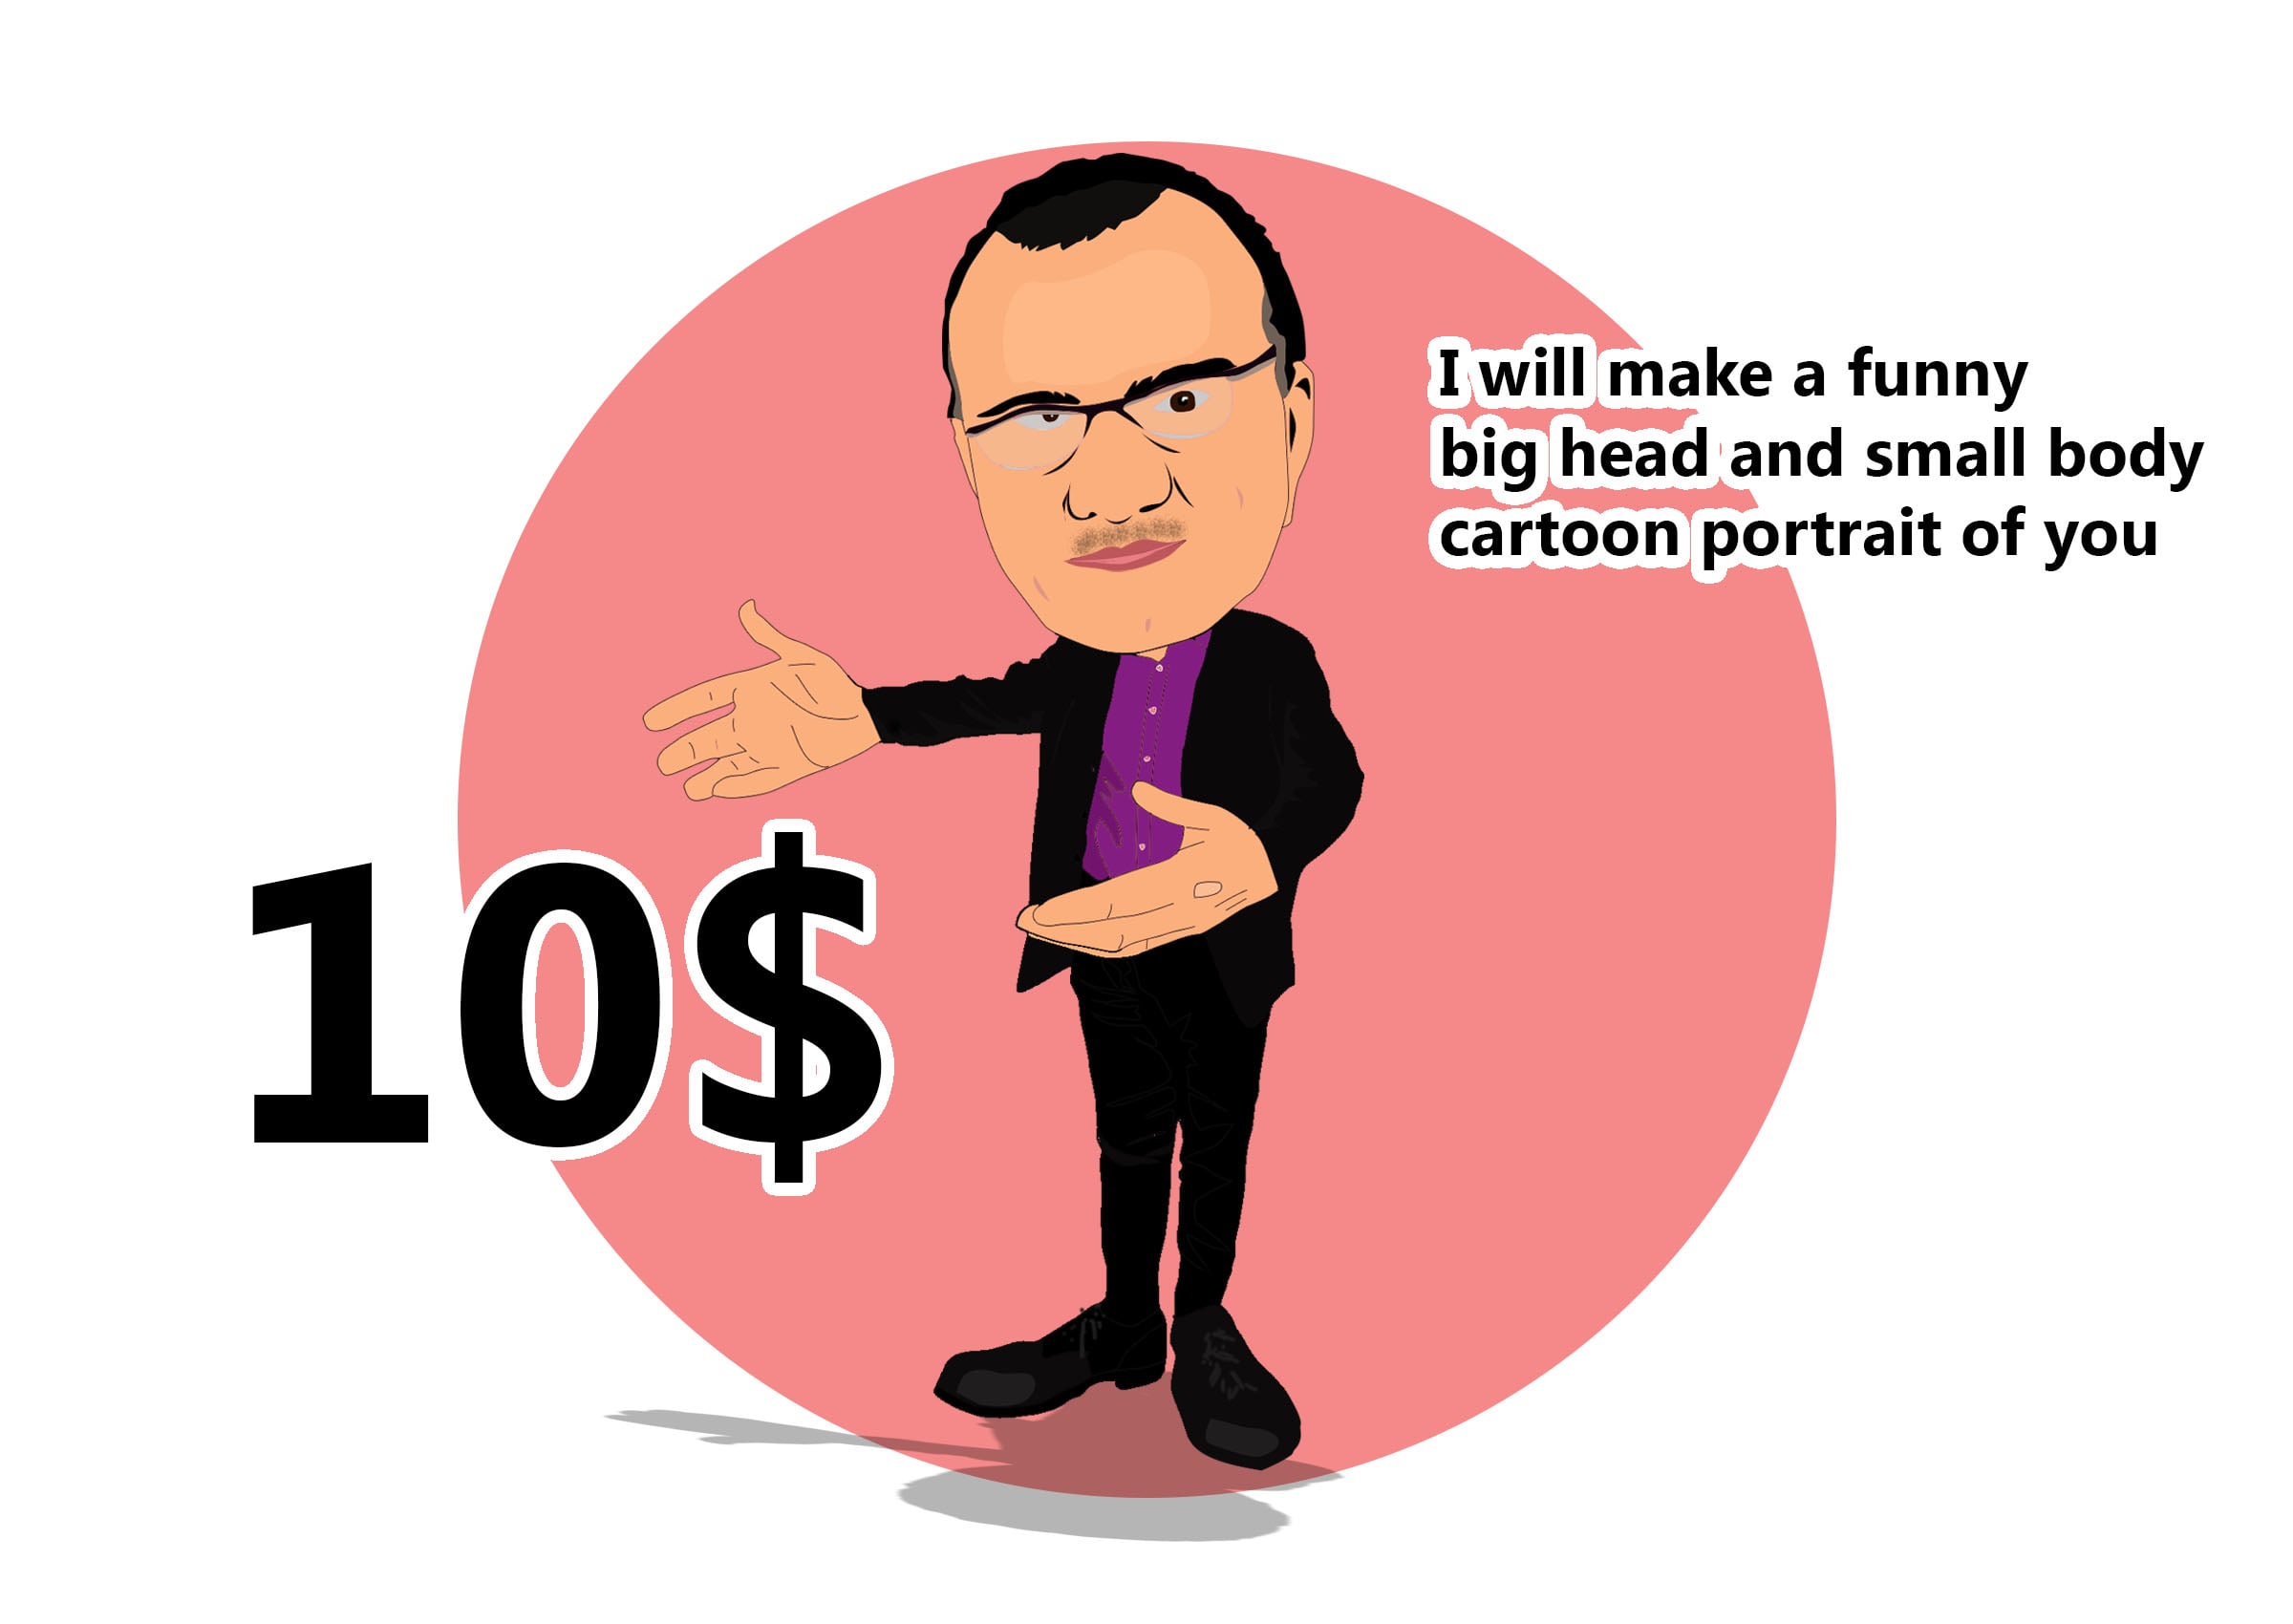 Make a funny big head and small body cartoon portrait of you by Isharan673  | Fiverr